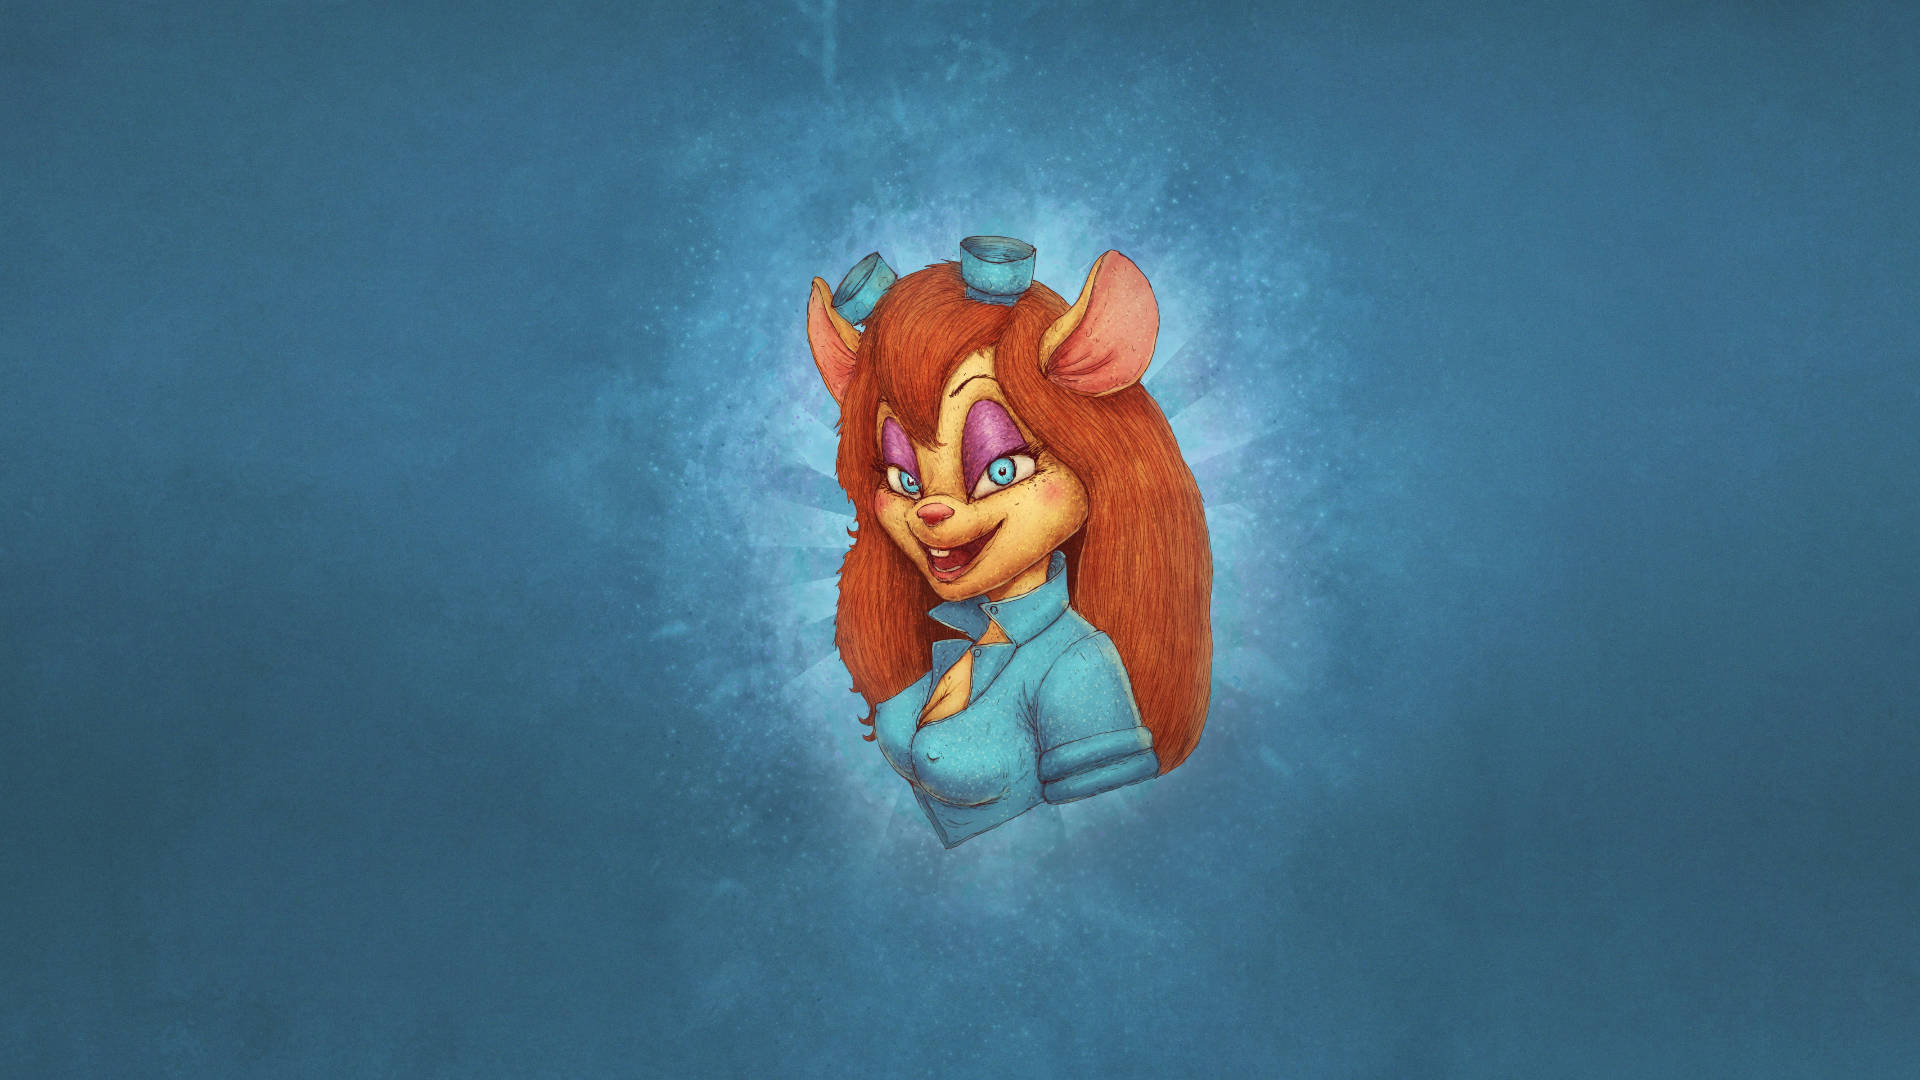 Gadget Hackwrench From Chip N Dale Rescue Rangers Background